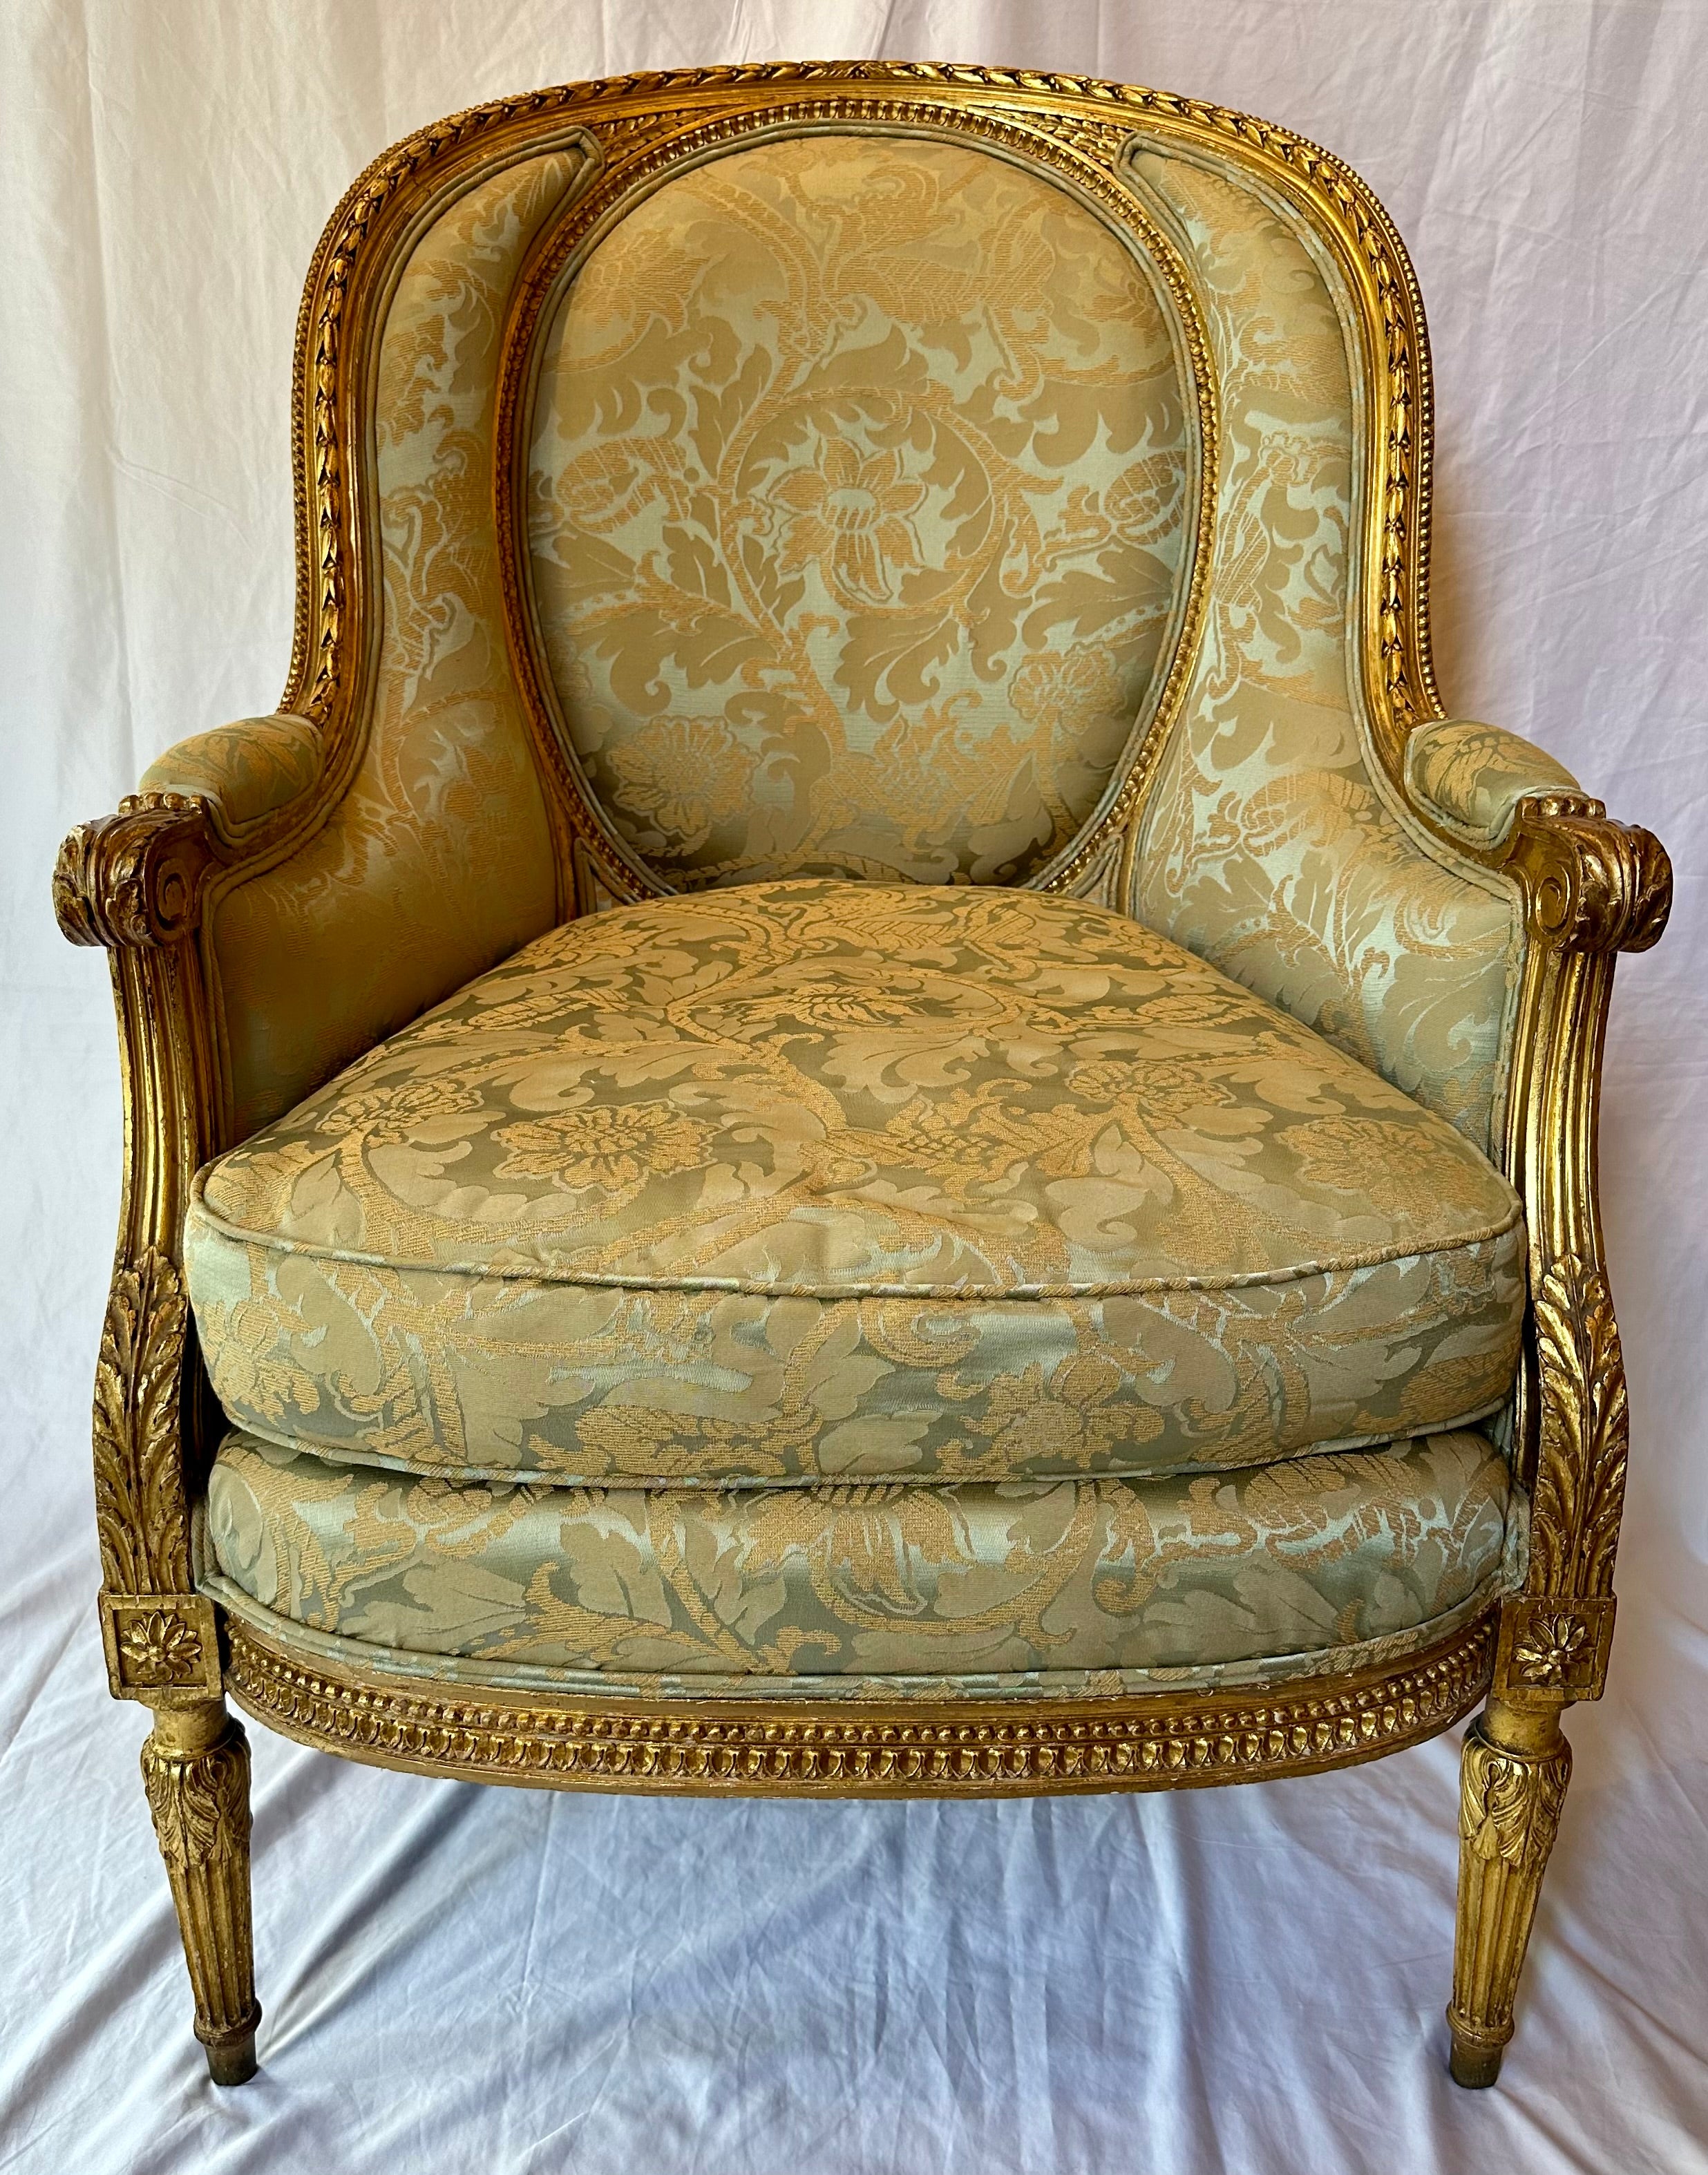 Pair Antique Late 19th Century French Gold Bergere Chairs, Circa 1890.
Fine Scalamandre Upholstery.